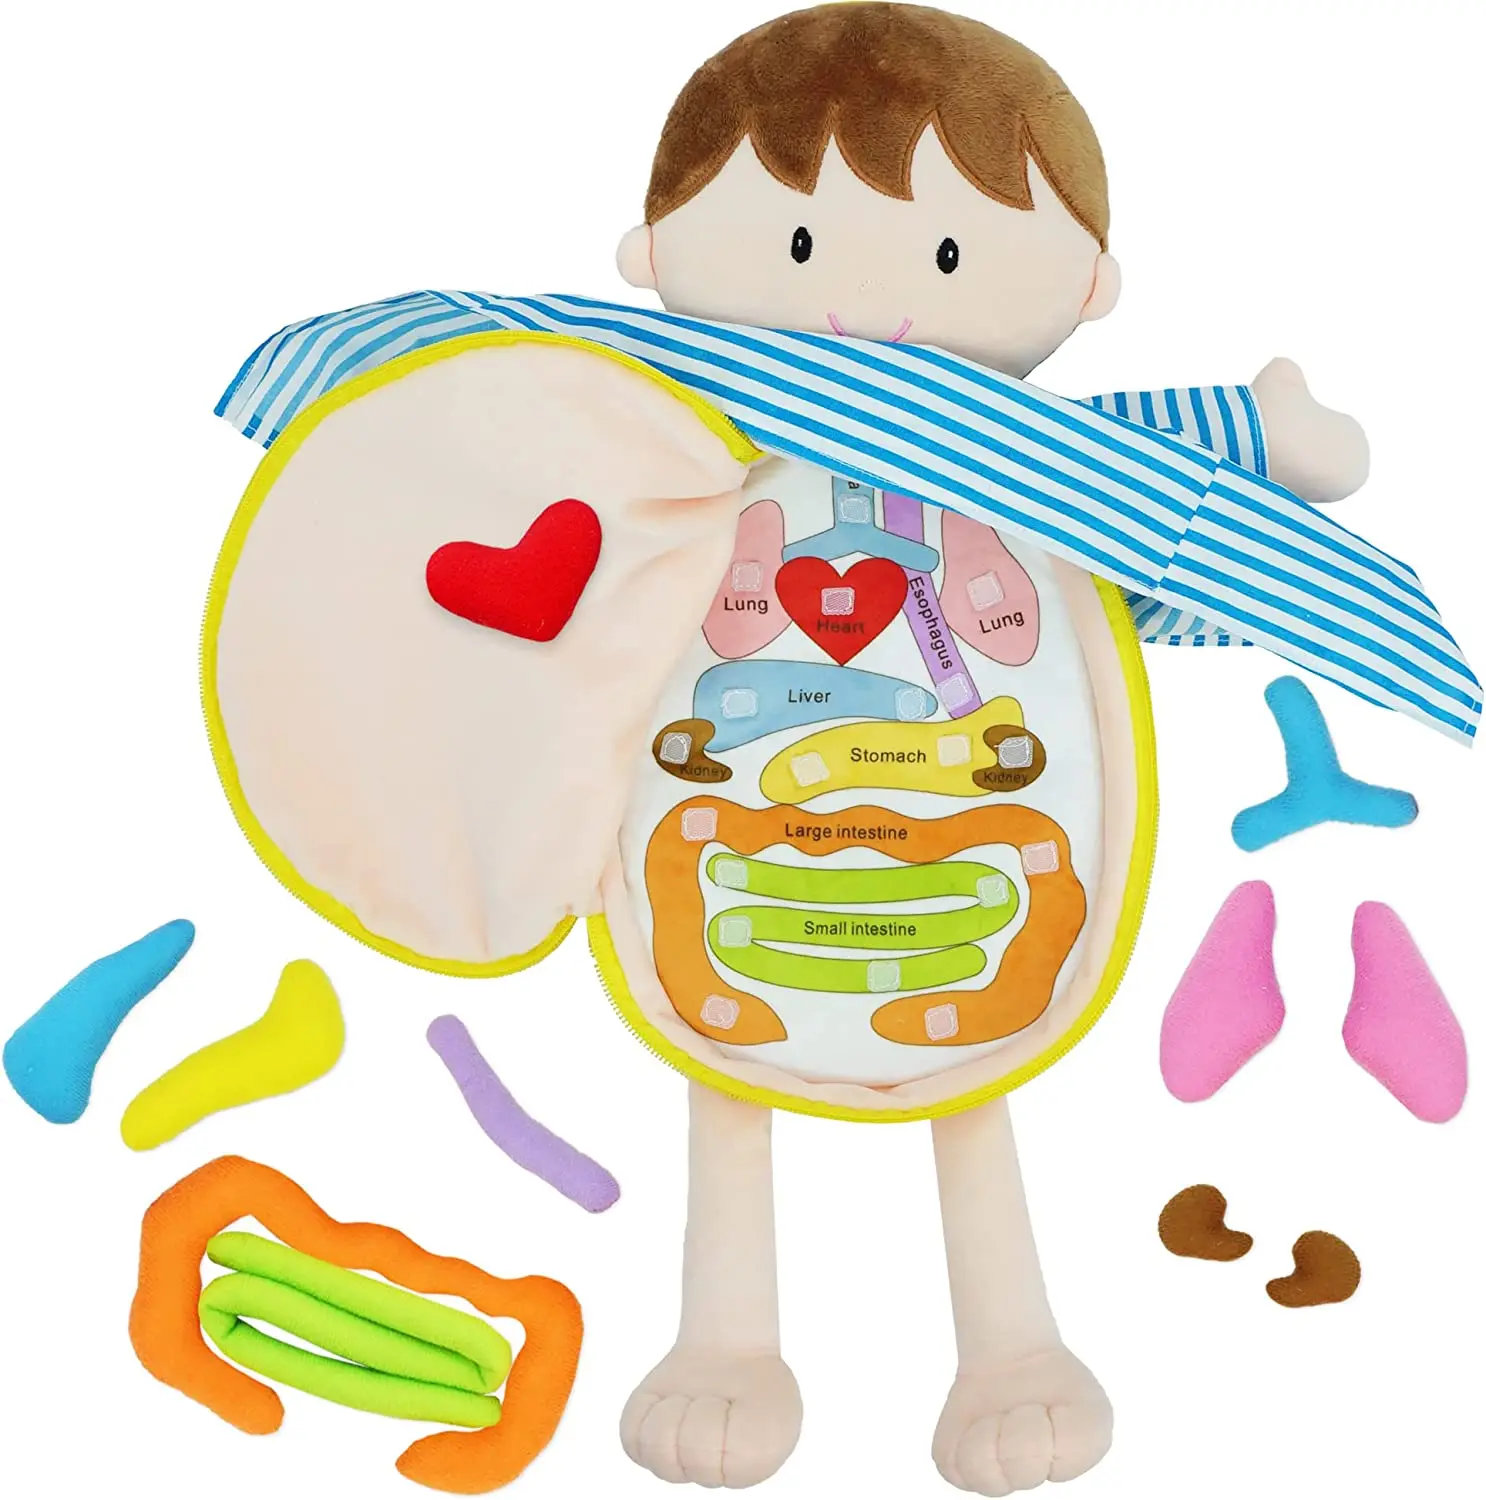 

Baby Toy Anatomy Plush Doll Assembled Plush Body human Organs Human Body Science Teaching Aid Tool Educational Toy For Children